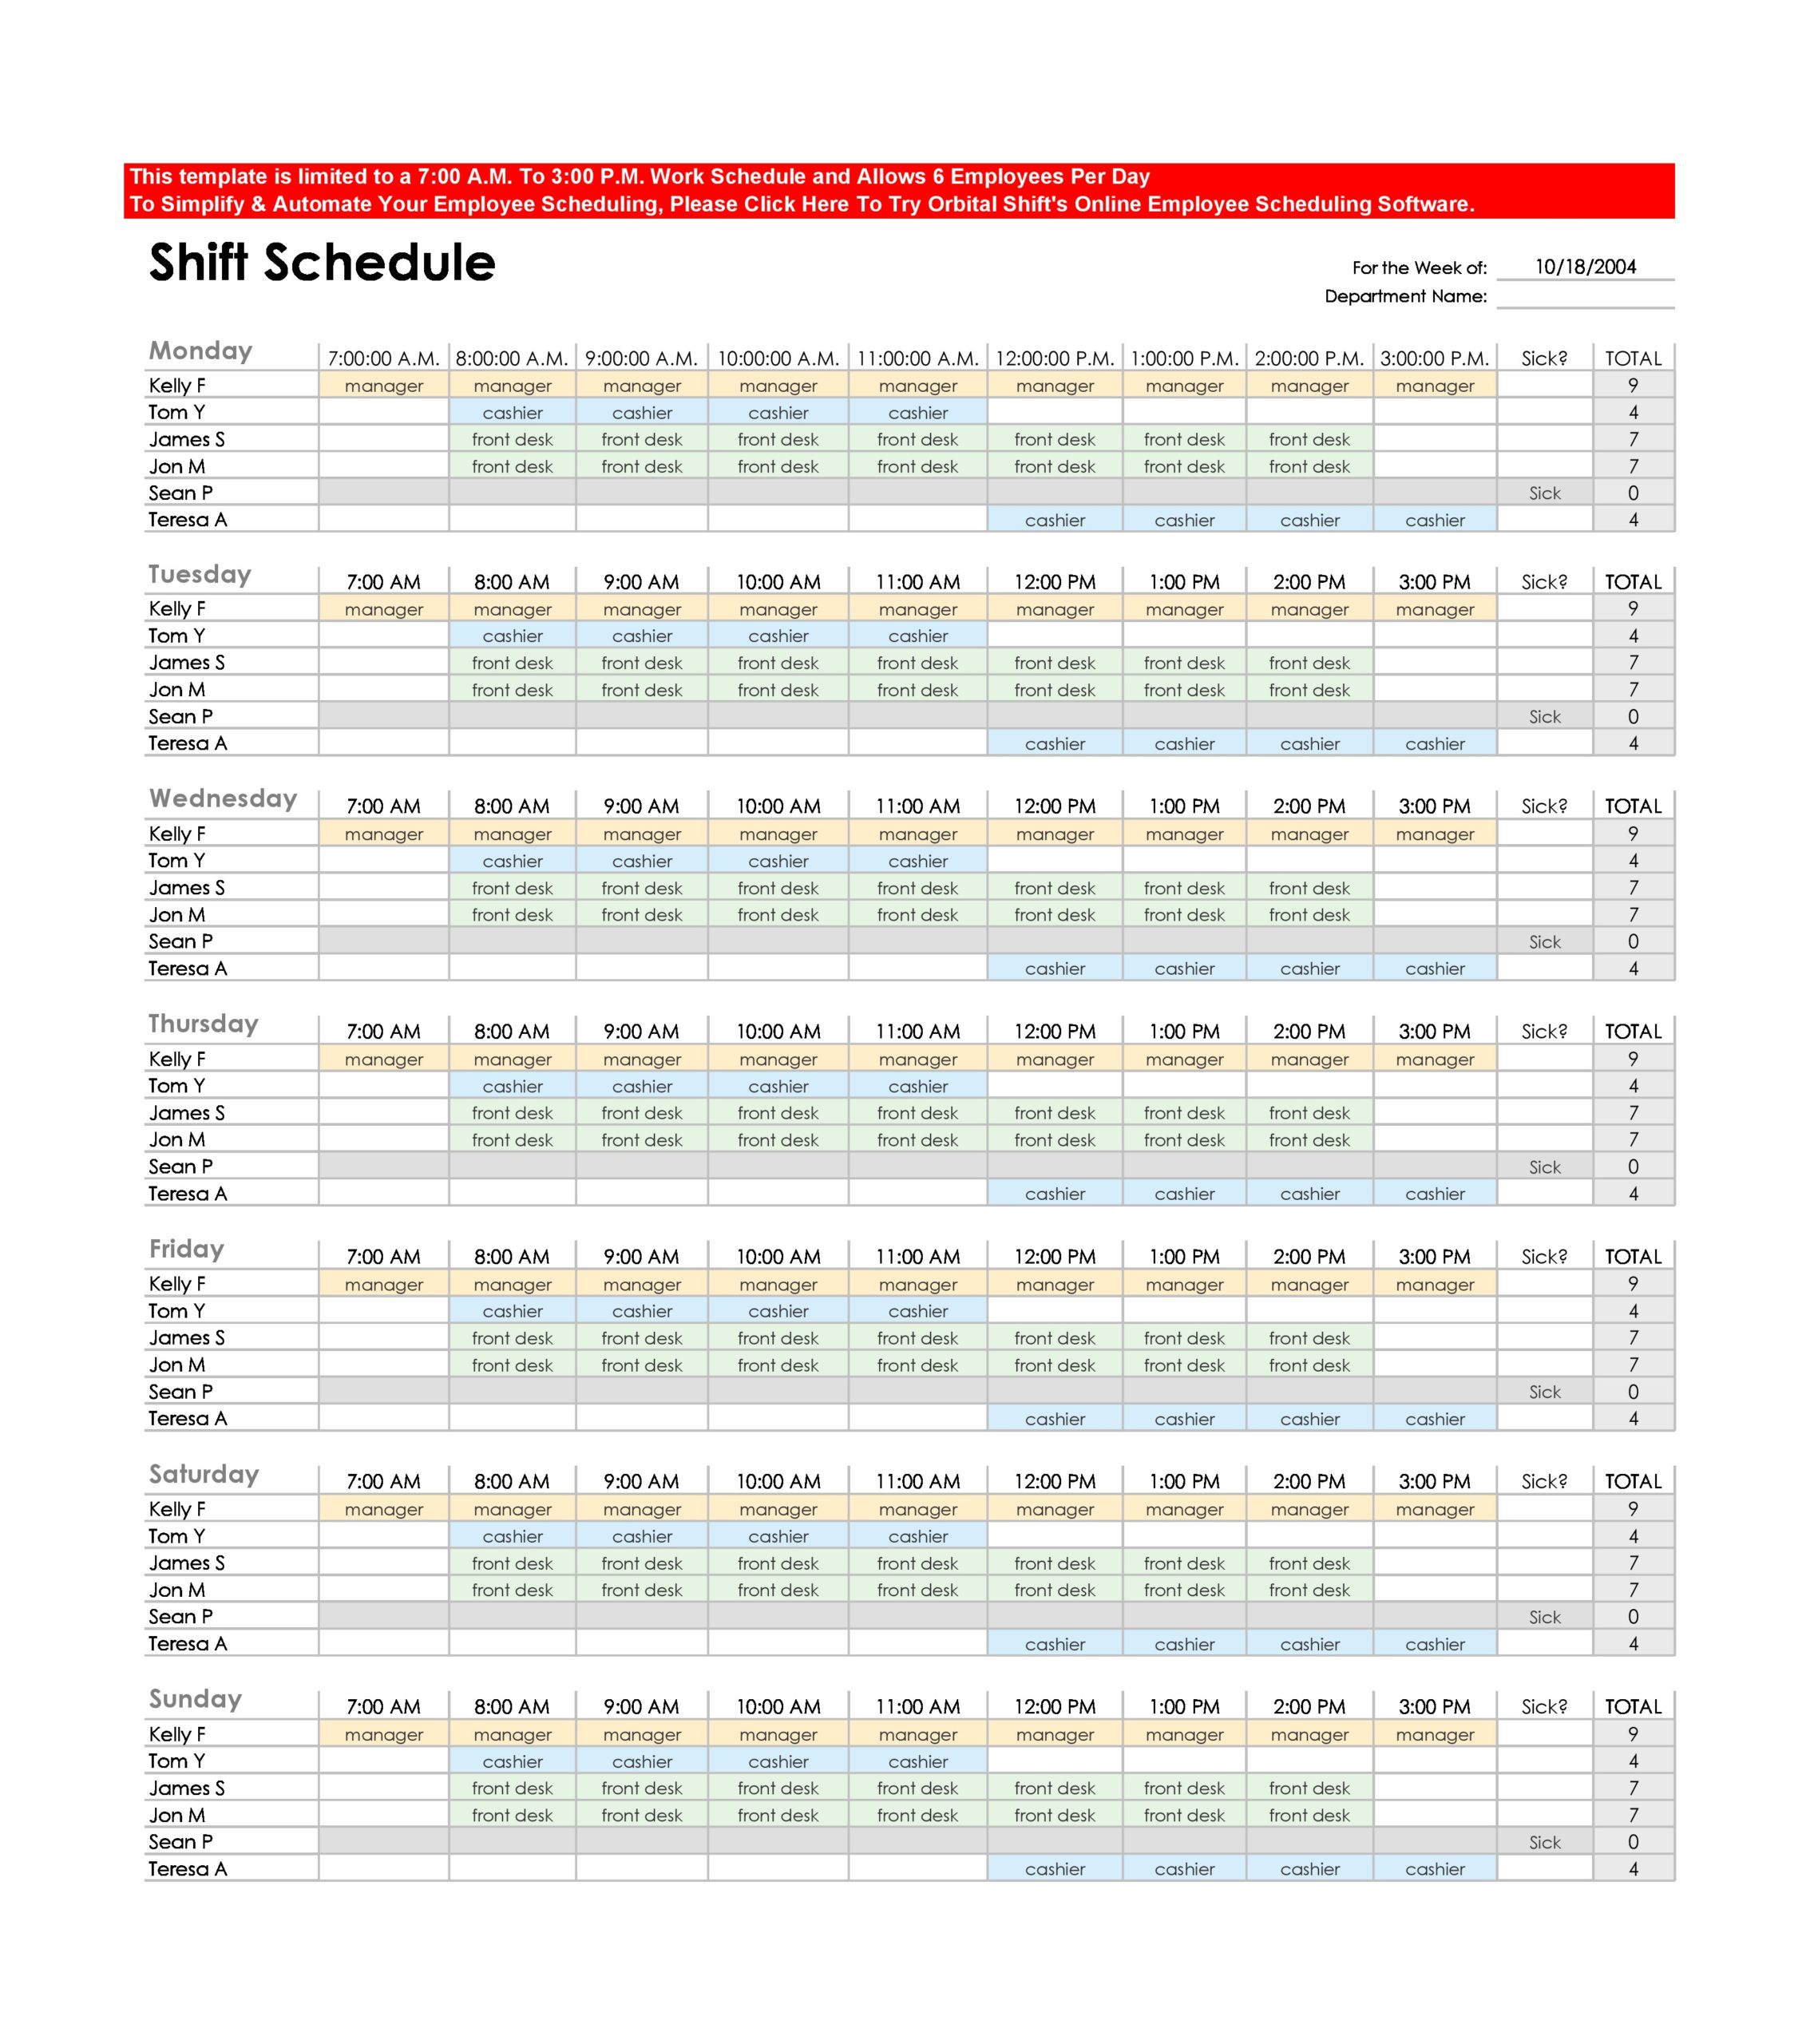 6-free-labor-schedule-templates-word-excel